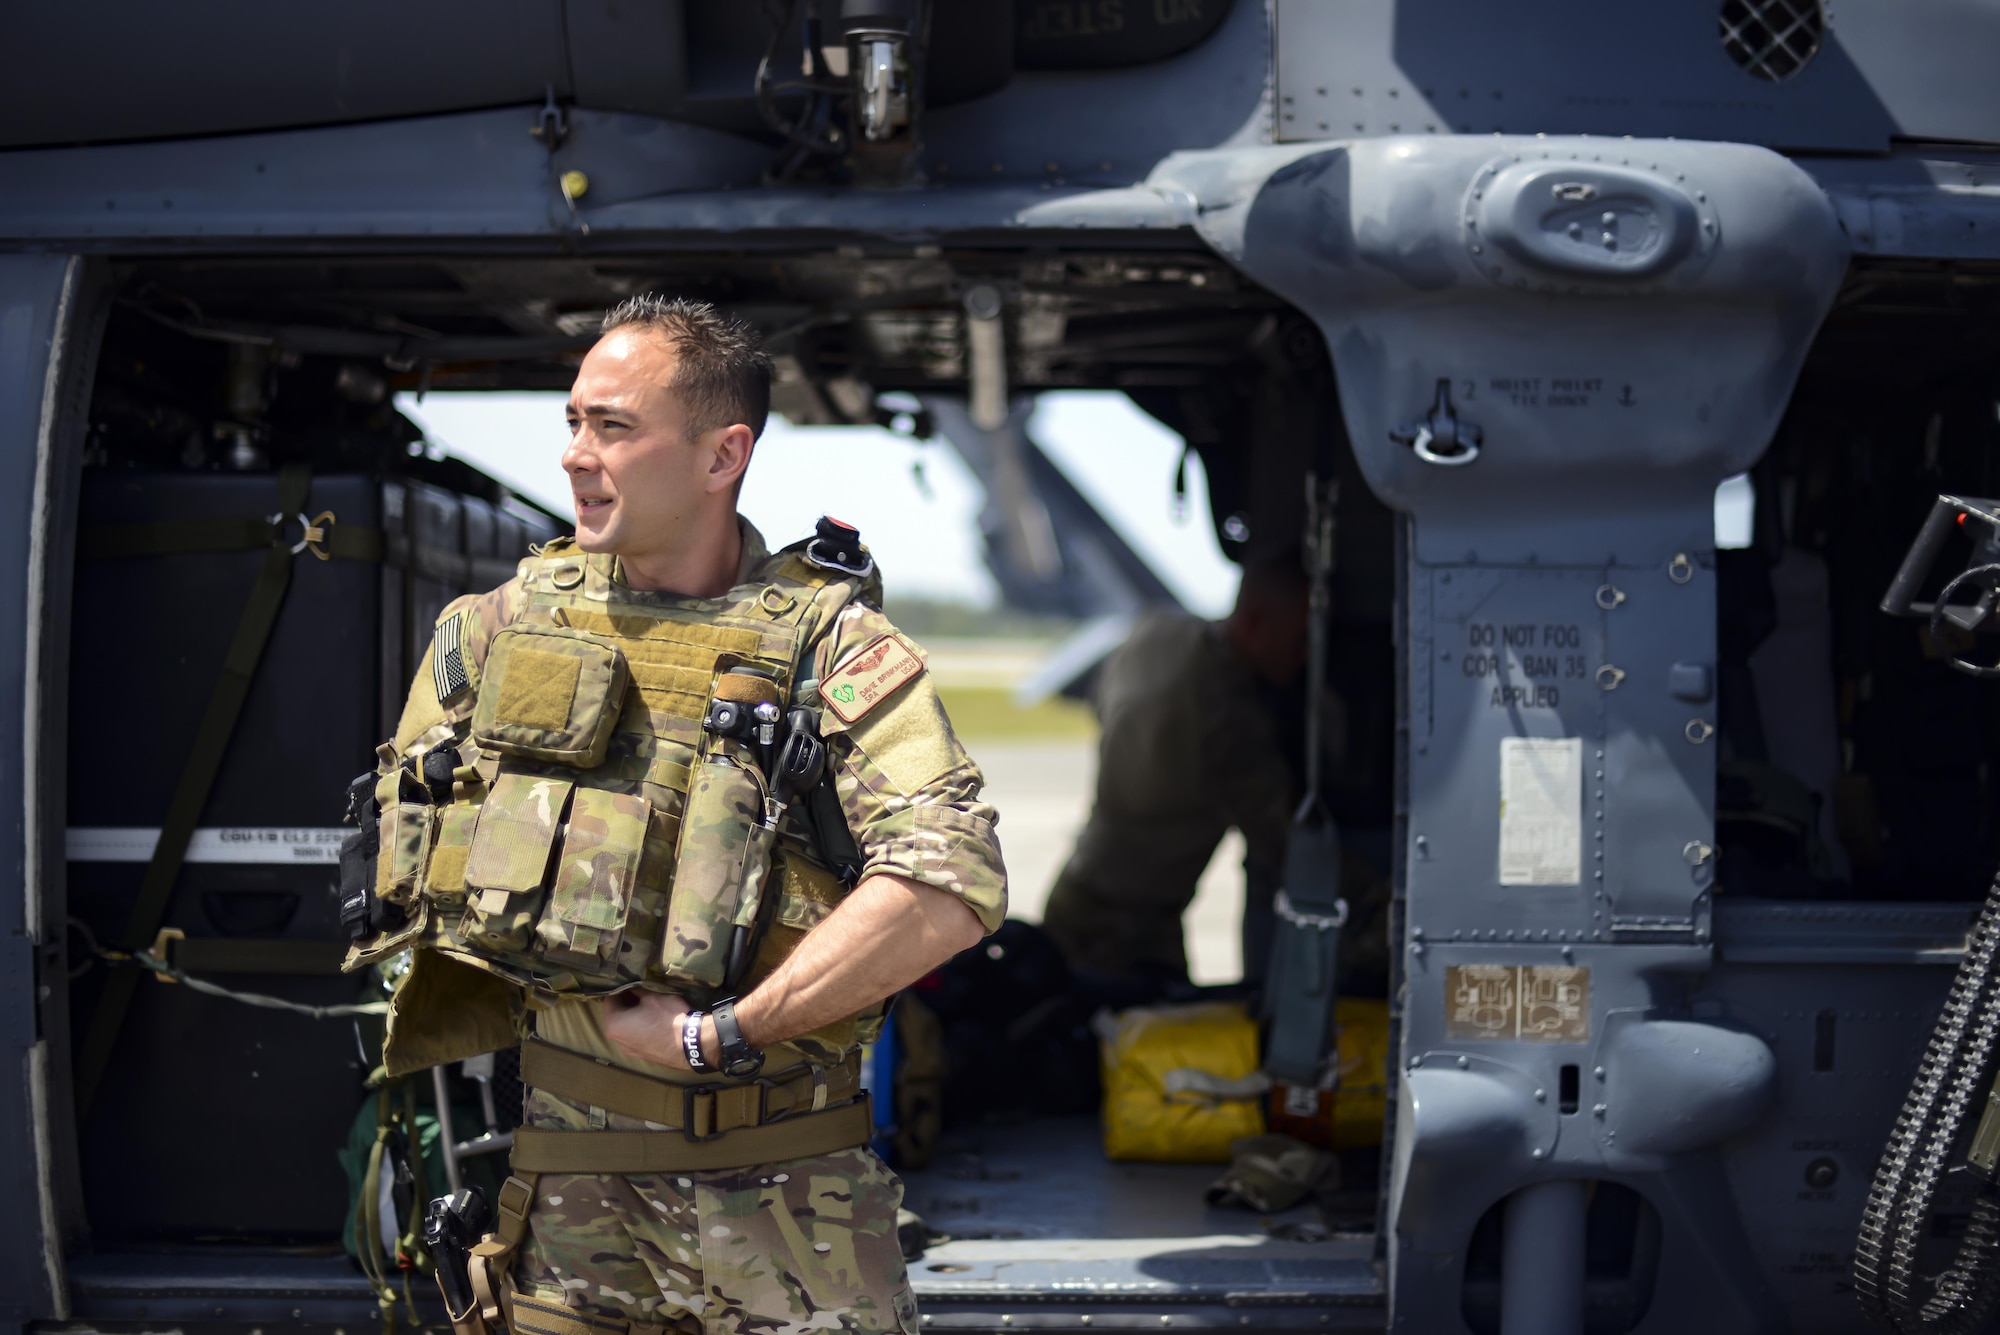 Senior Airman Davie Brinkmann, a special mission’s aviator from the 920th Rescue Wing, preps his gear in front of an HH-60G Pave Hawk during the National Salute to America’s Heroes Air and Sea Show media day May 26, 2017, at Miami Beach, Fla. Top tier U.S. military assets have assembled in Miami to showcase air superiority while honoring those who have made the ultimate sacrifice during the Memorial Day weekend. The 920th Rescue Wing, the Air Force Reserve’s only rescue wing, will headline the airshow by demonstrating combat-search-and-rescue capabilities by teaming up with a HC-130P/N Combat King and four A-10 Thunderbolt II aircraft. (U.S. Air Force photo/Staff Sgt. Jared Trimarchi)